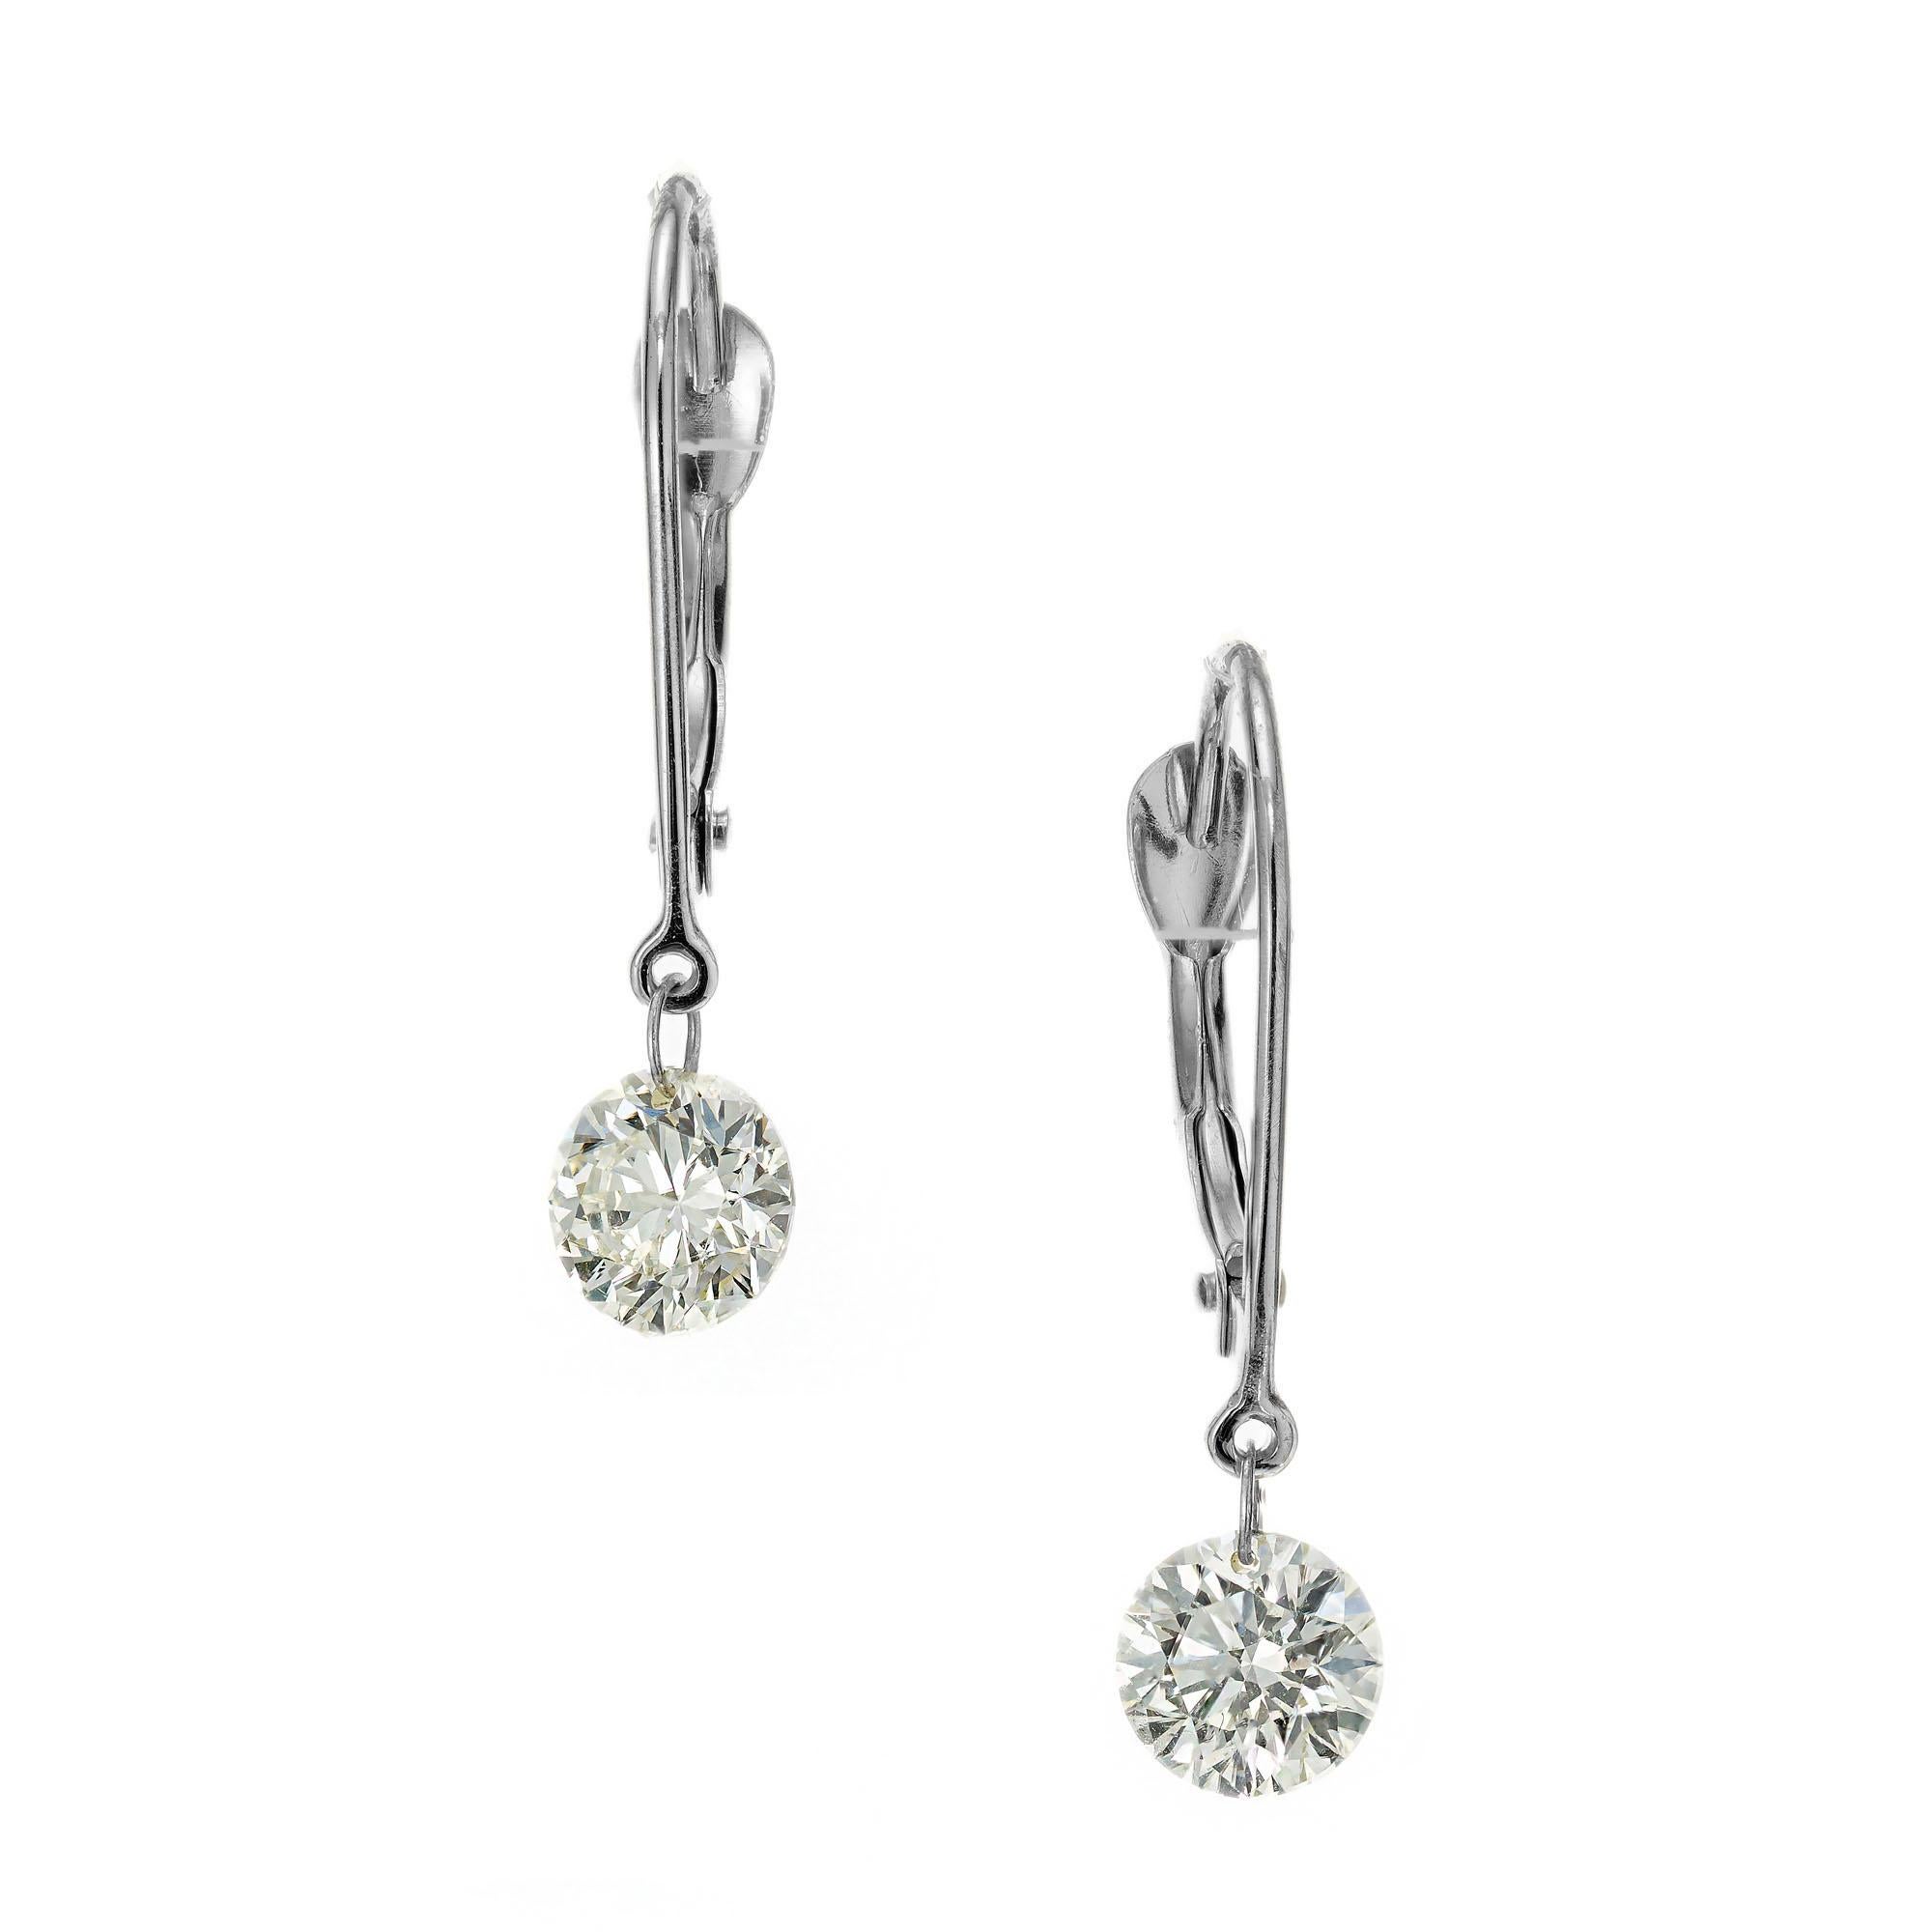 Diamond dangle earrings. 2 round brilliant cut diamonds. 14k white gold wire lever back tops.  

2 round brilliant cut diamonds, H-I VS approx. .90cts
14k white gold 
Stamped: 14k
.7 grams
Top to bottom: 20mm or 13/16 Inch
Width: 4.9mnm or 3/16